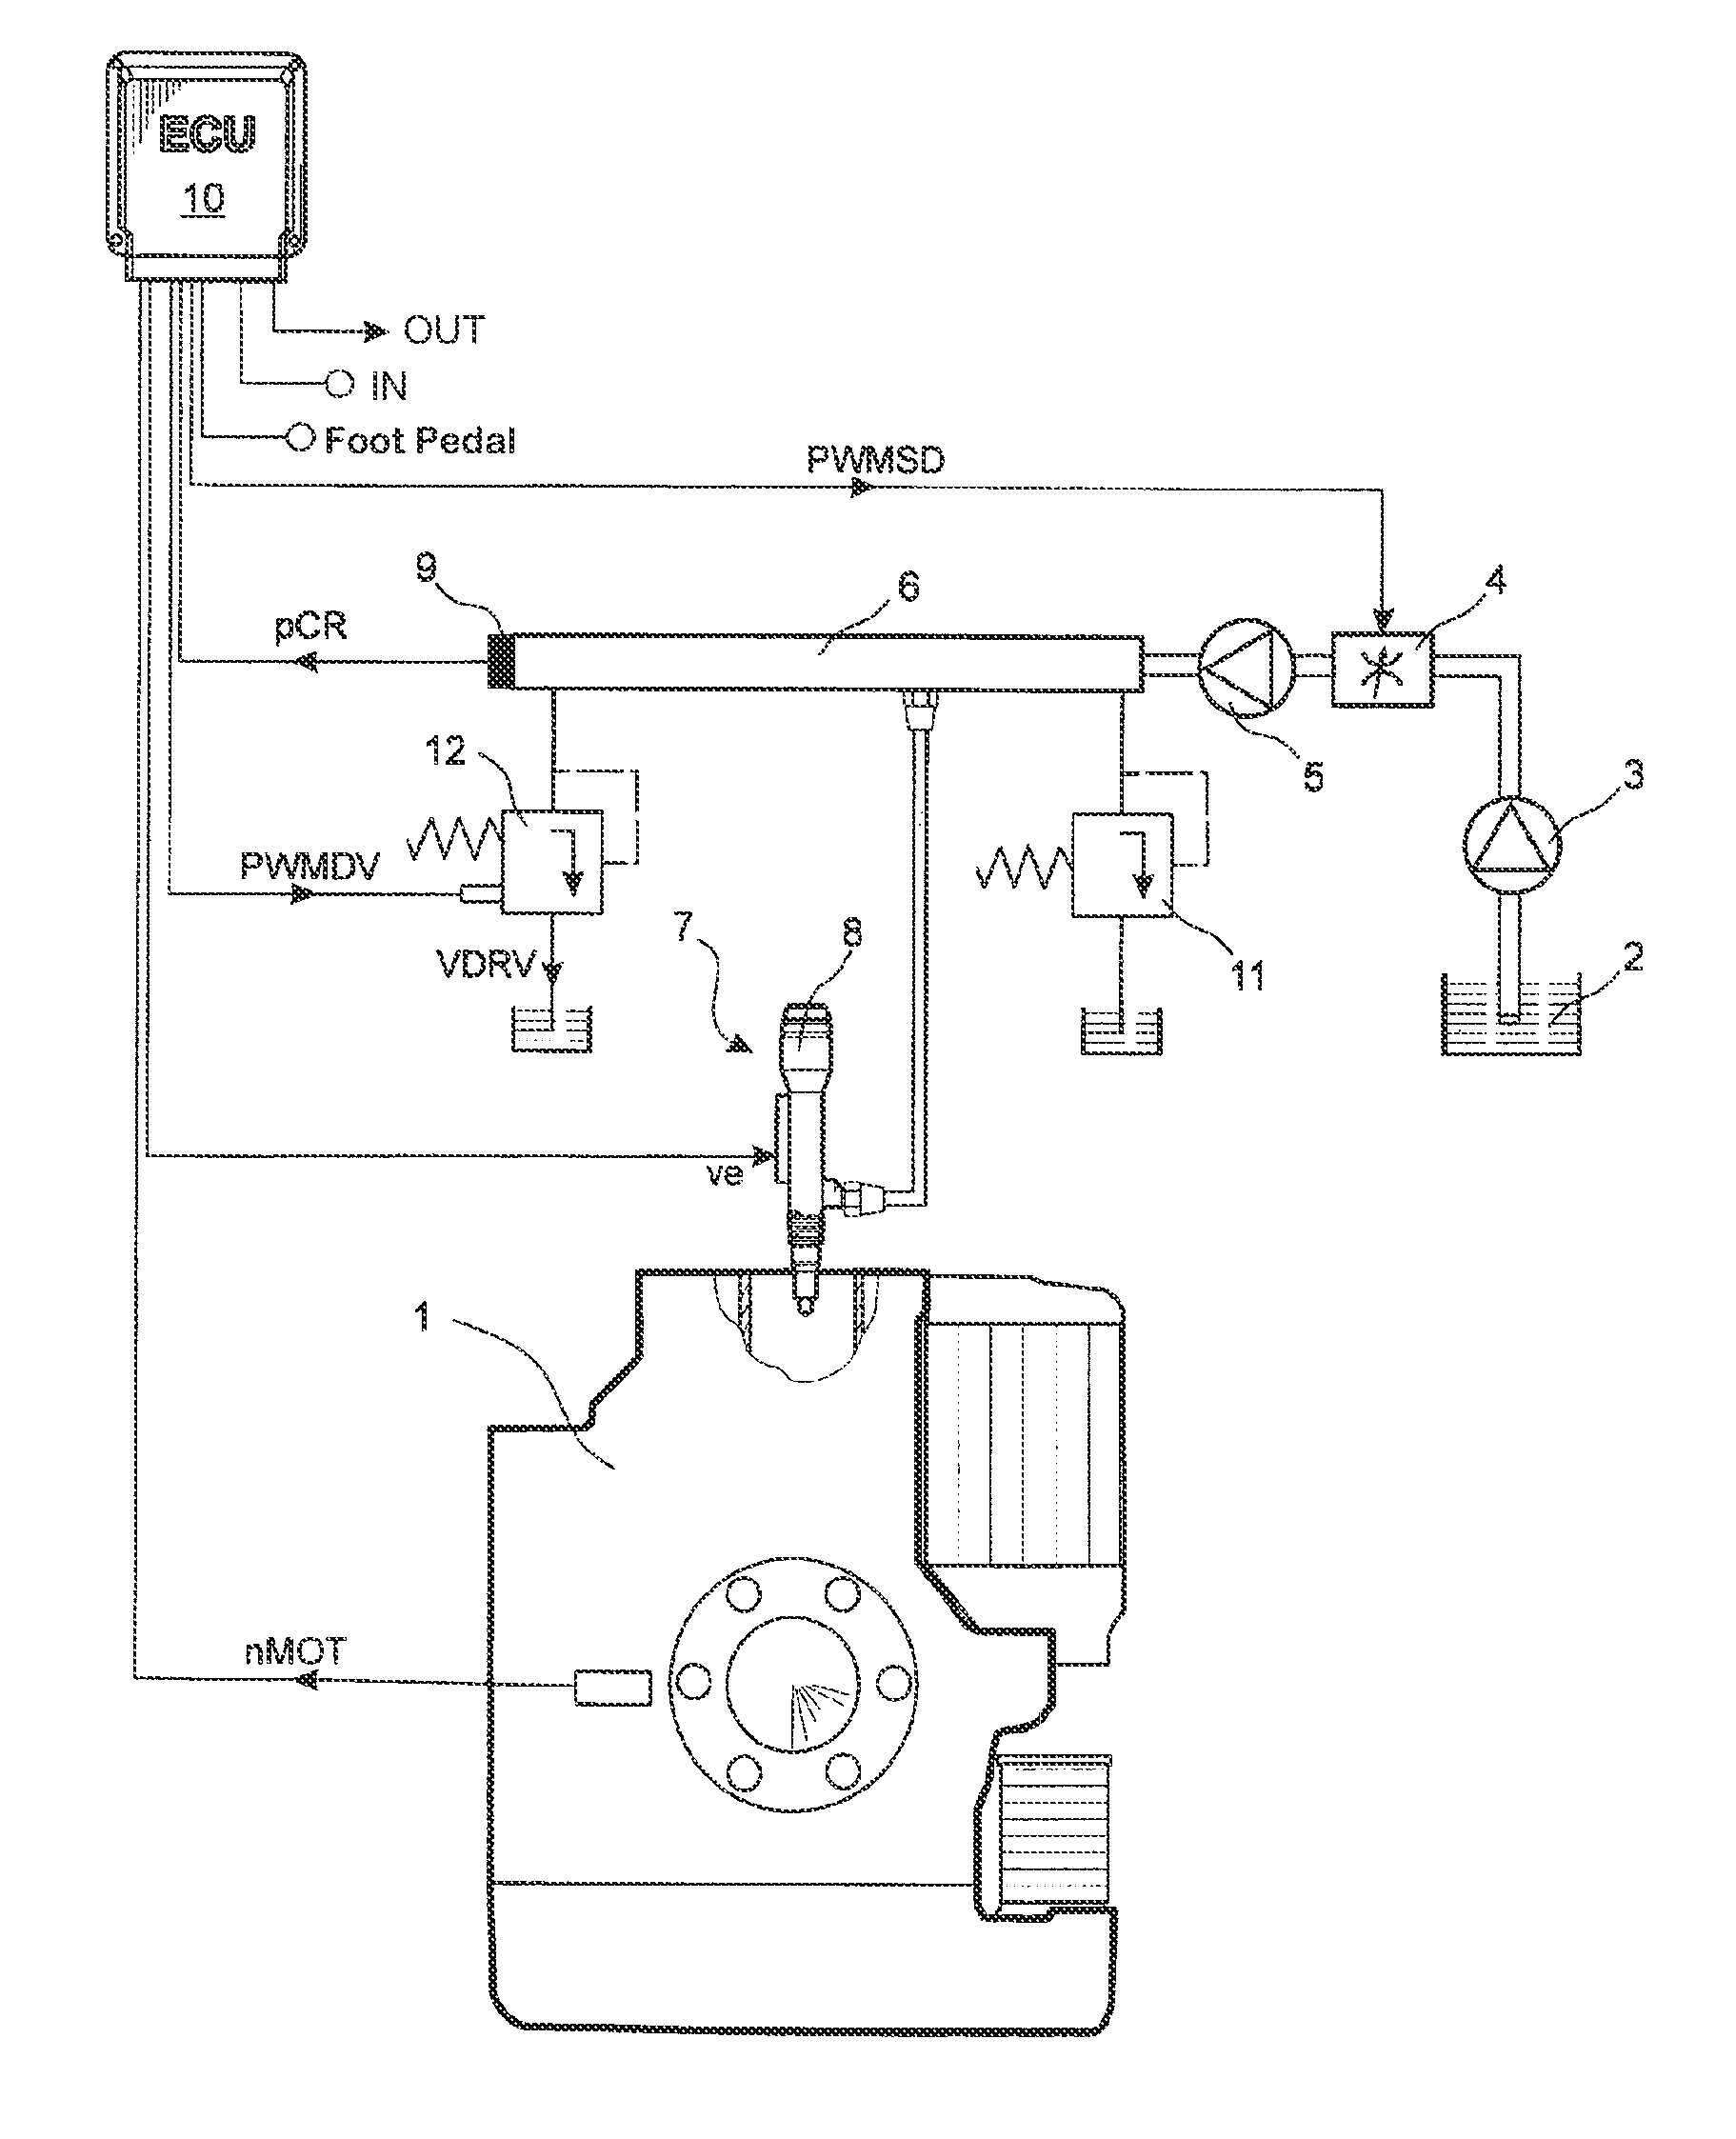 Method for the open-loop control and closed-loop control of an internal combustion engine